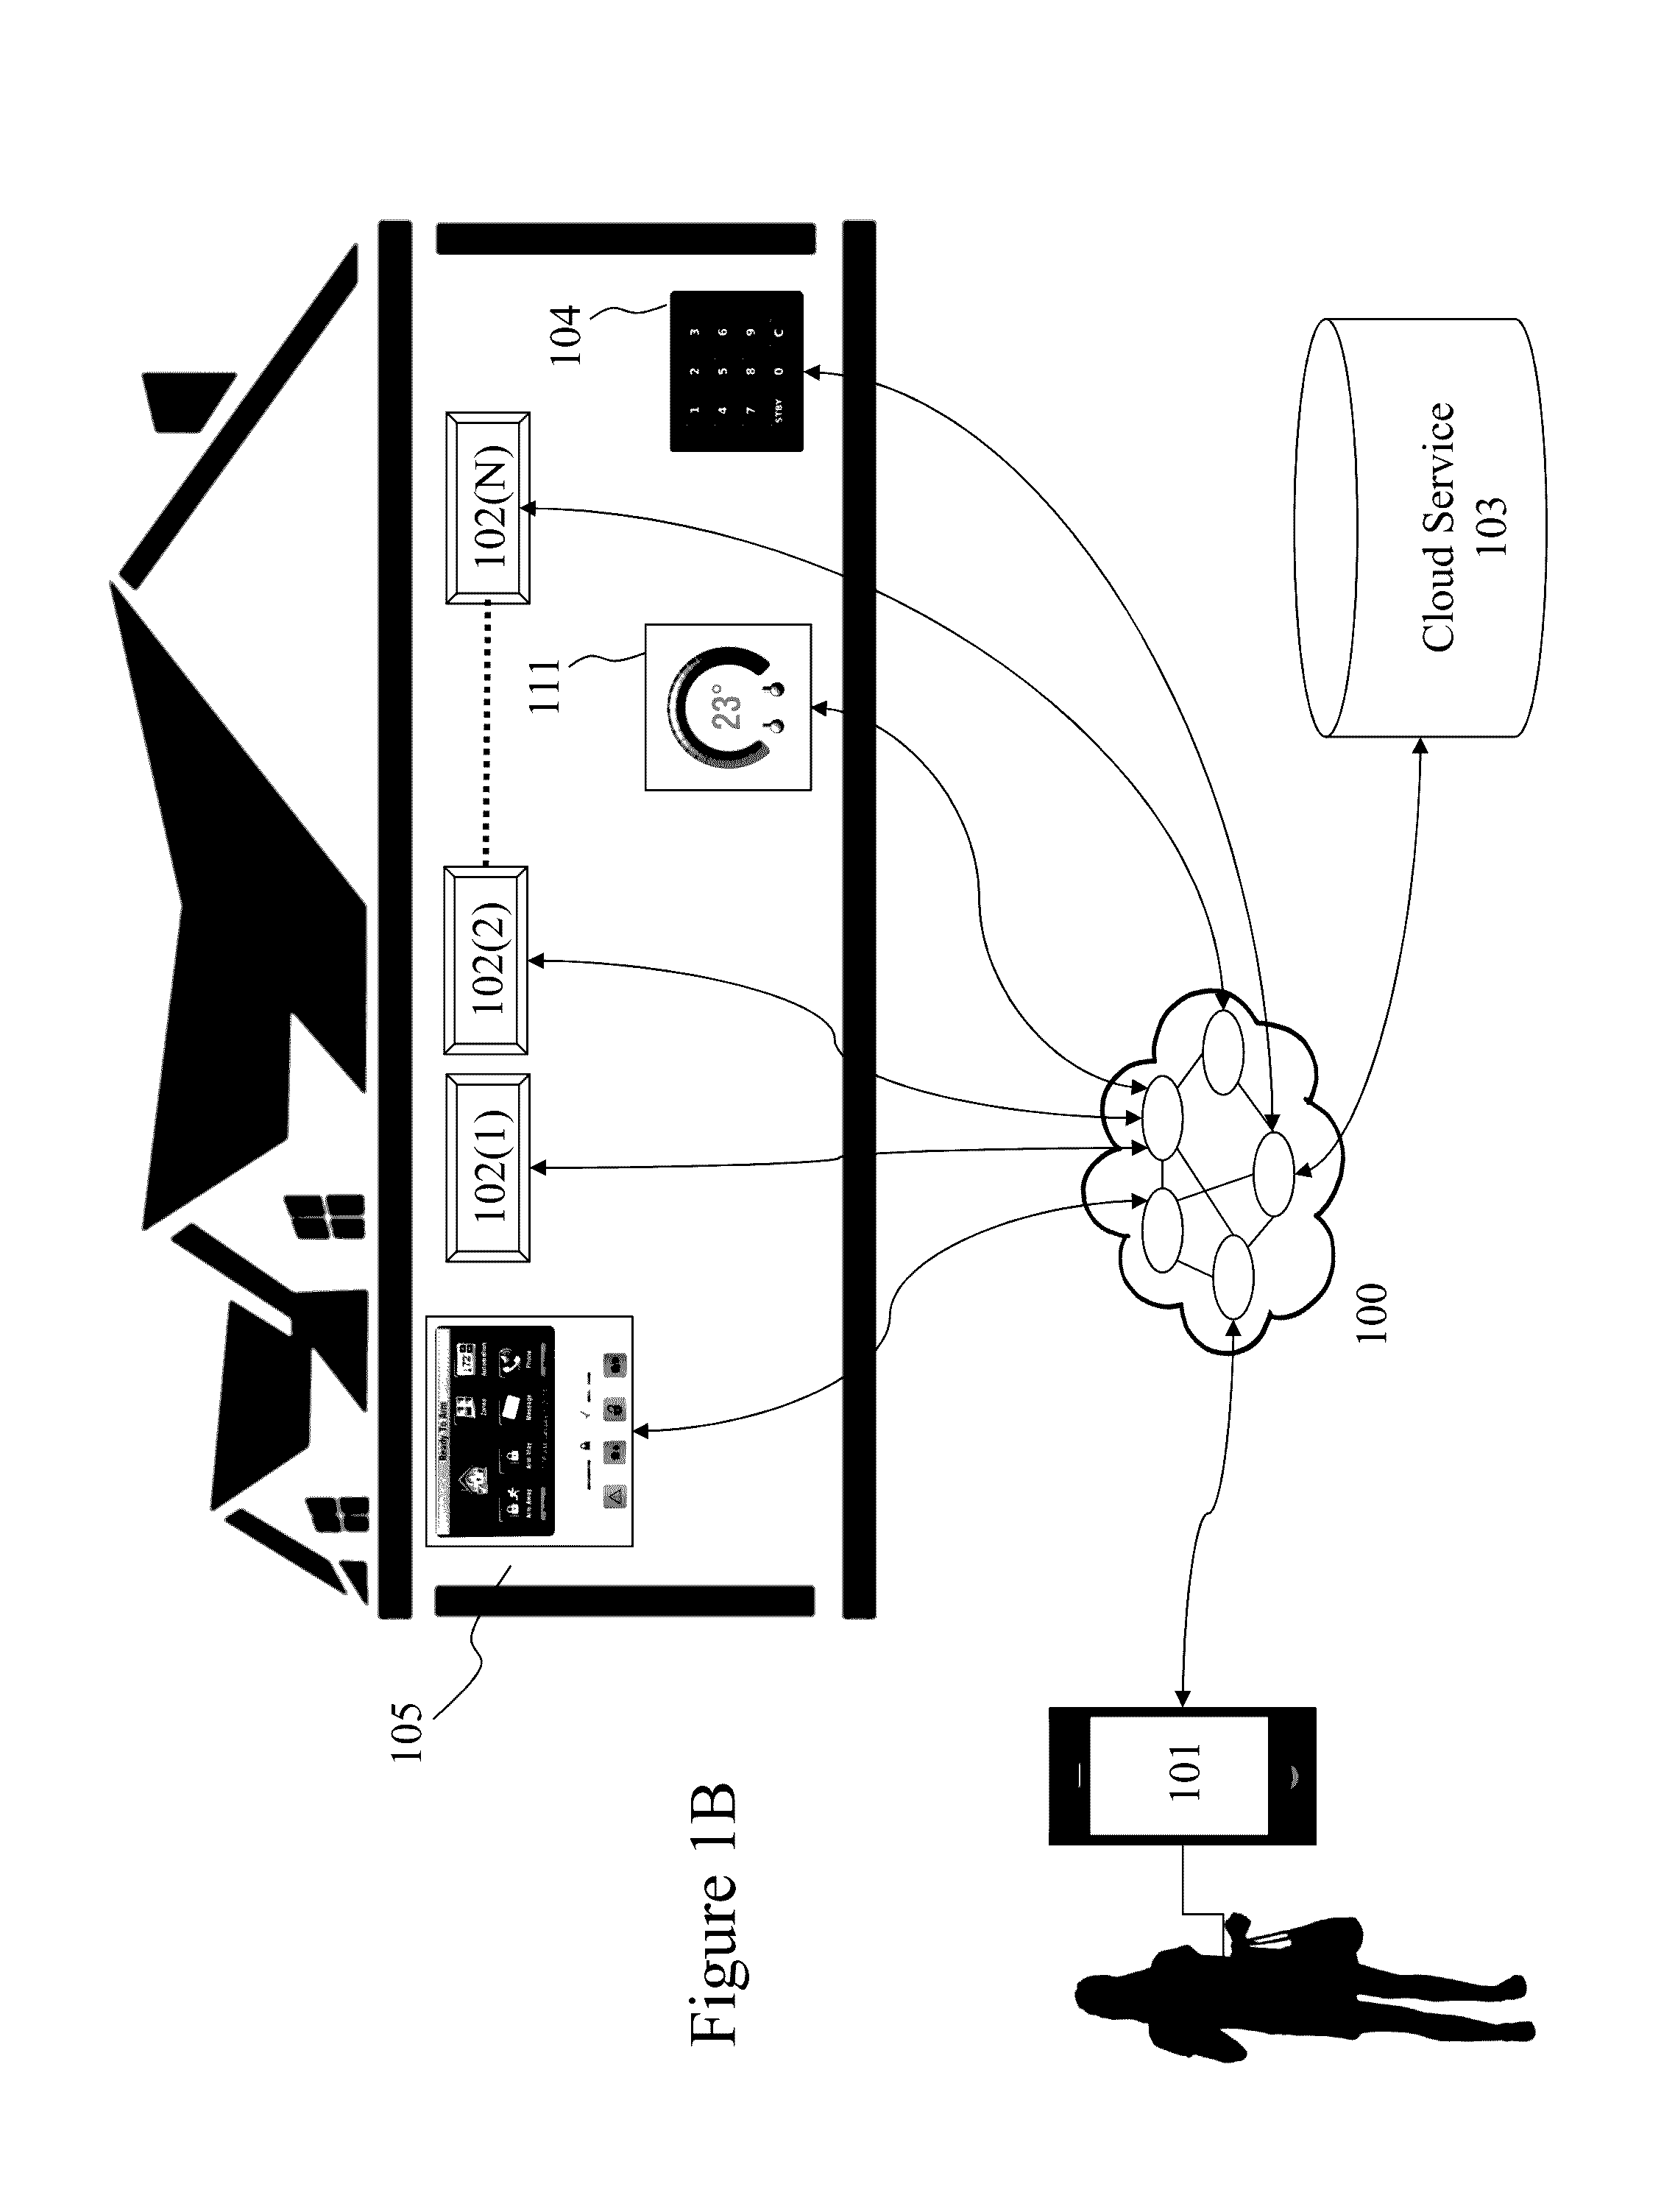 System-based control of programmable devices